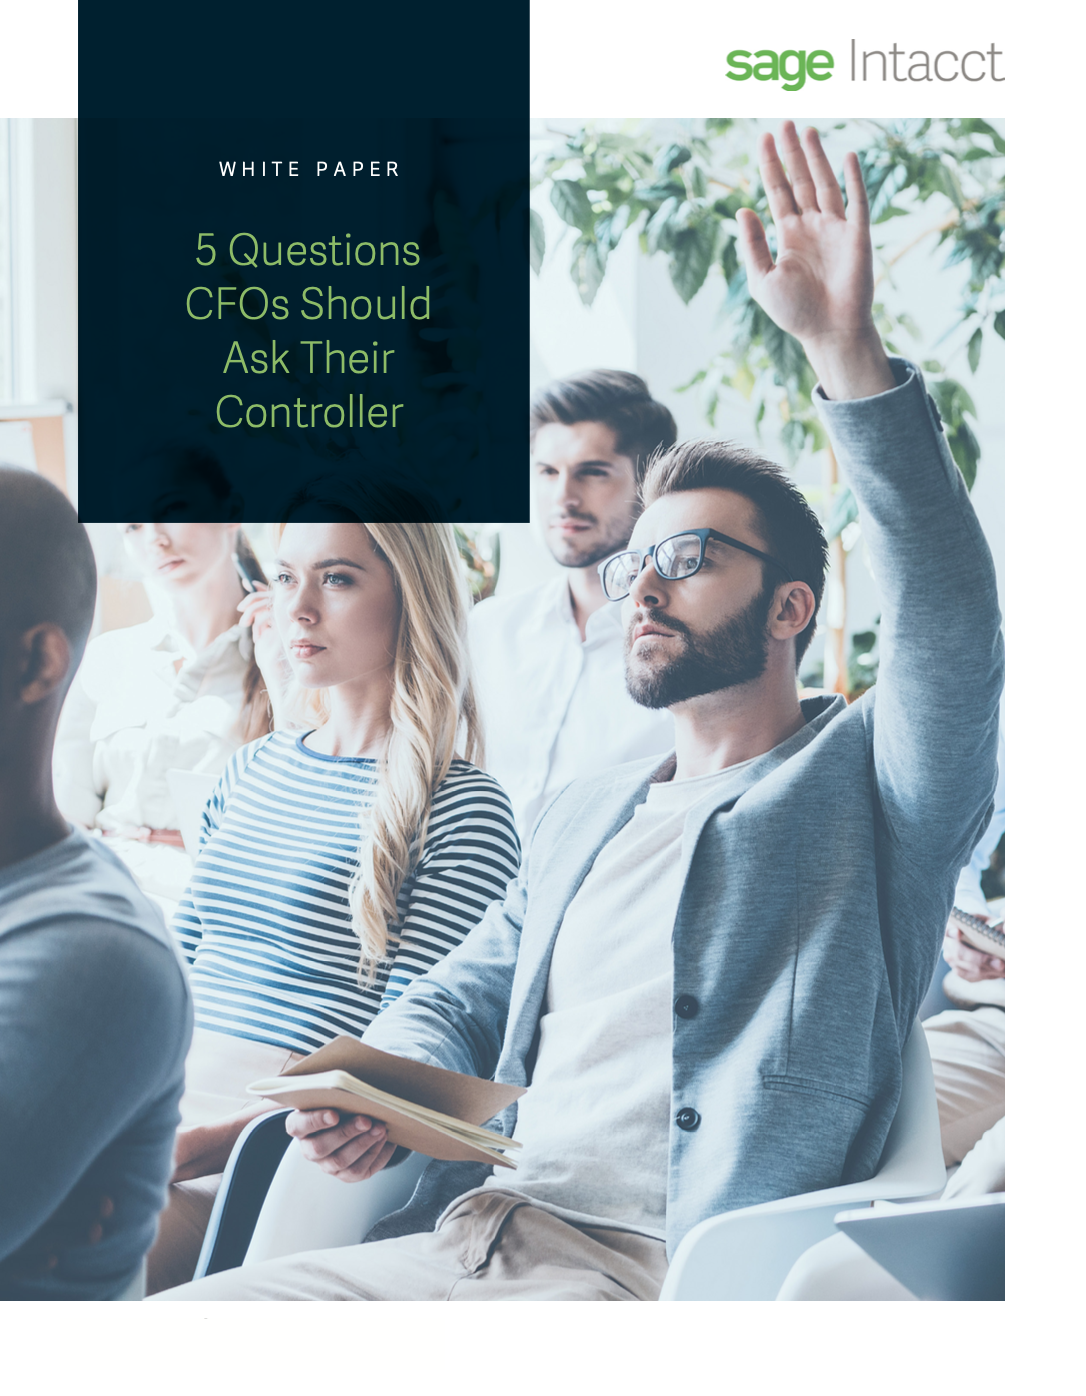 Questions CFOs for Controllers